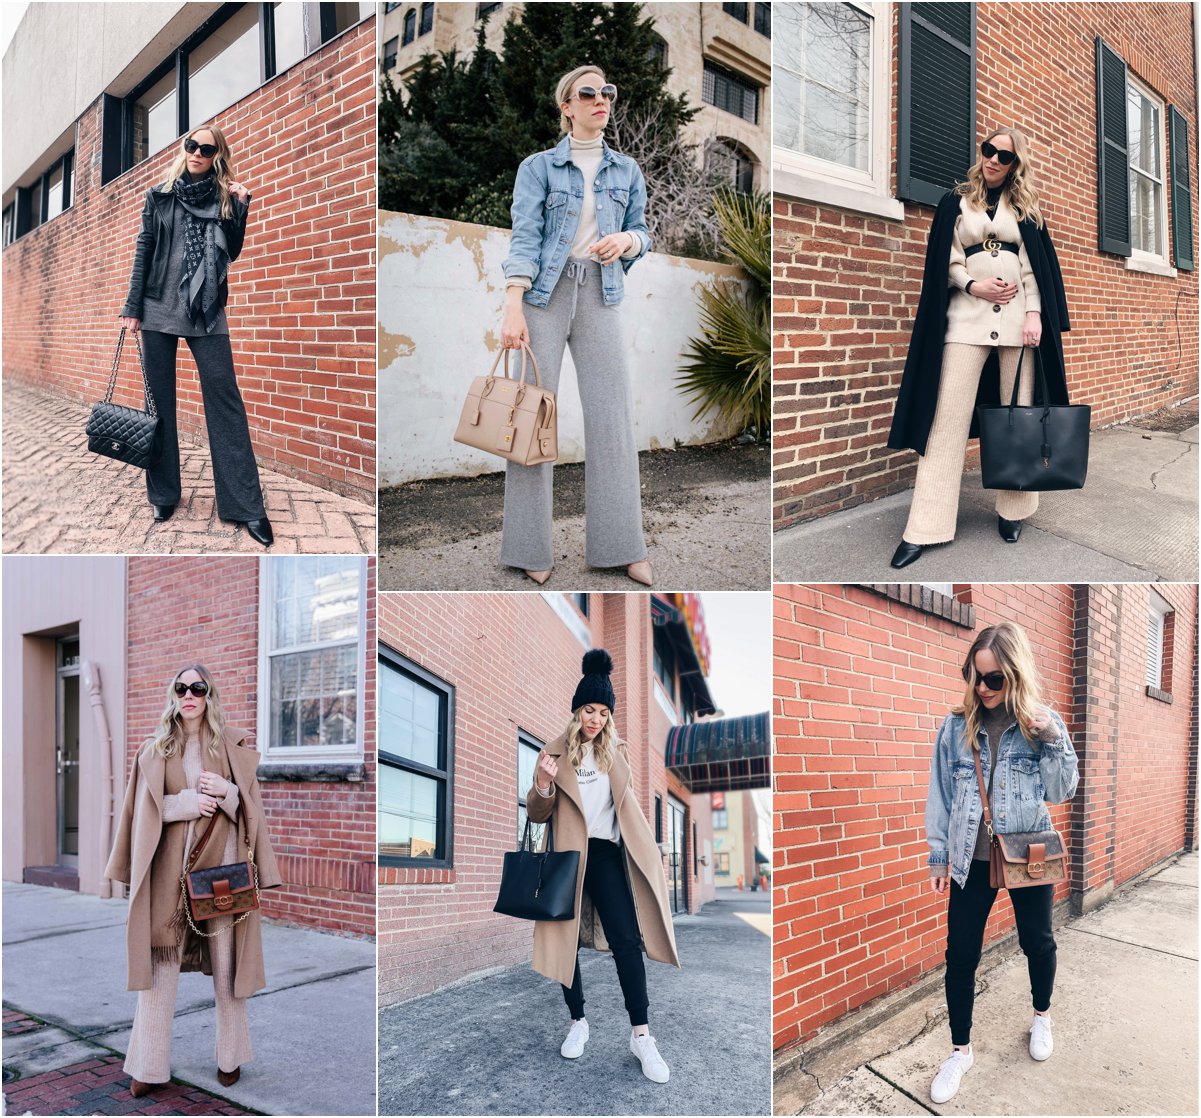 Meagan Brandon fashion blogger of Meagan's Moda shows how to elevate loungewear, how to dress up knit pants and joggers